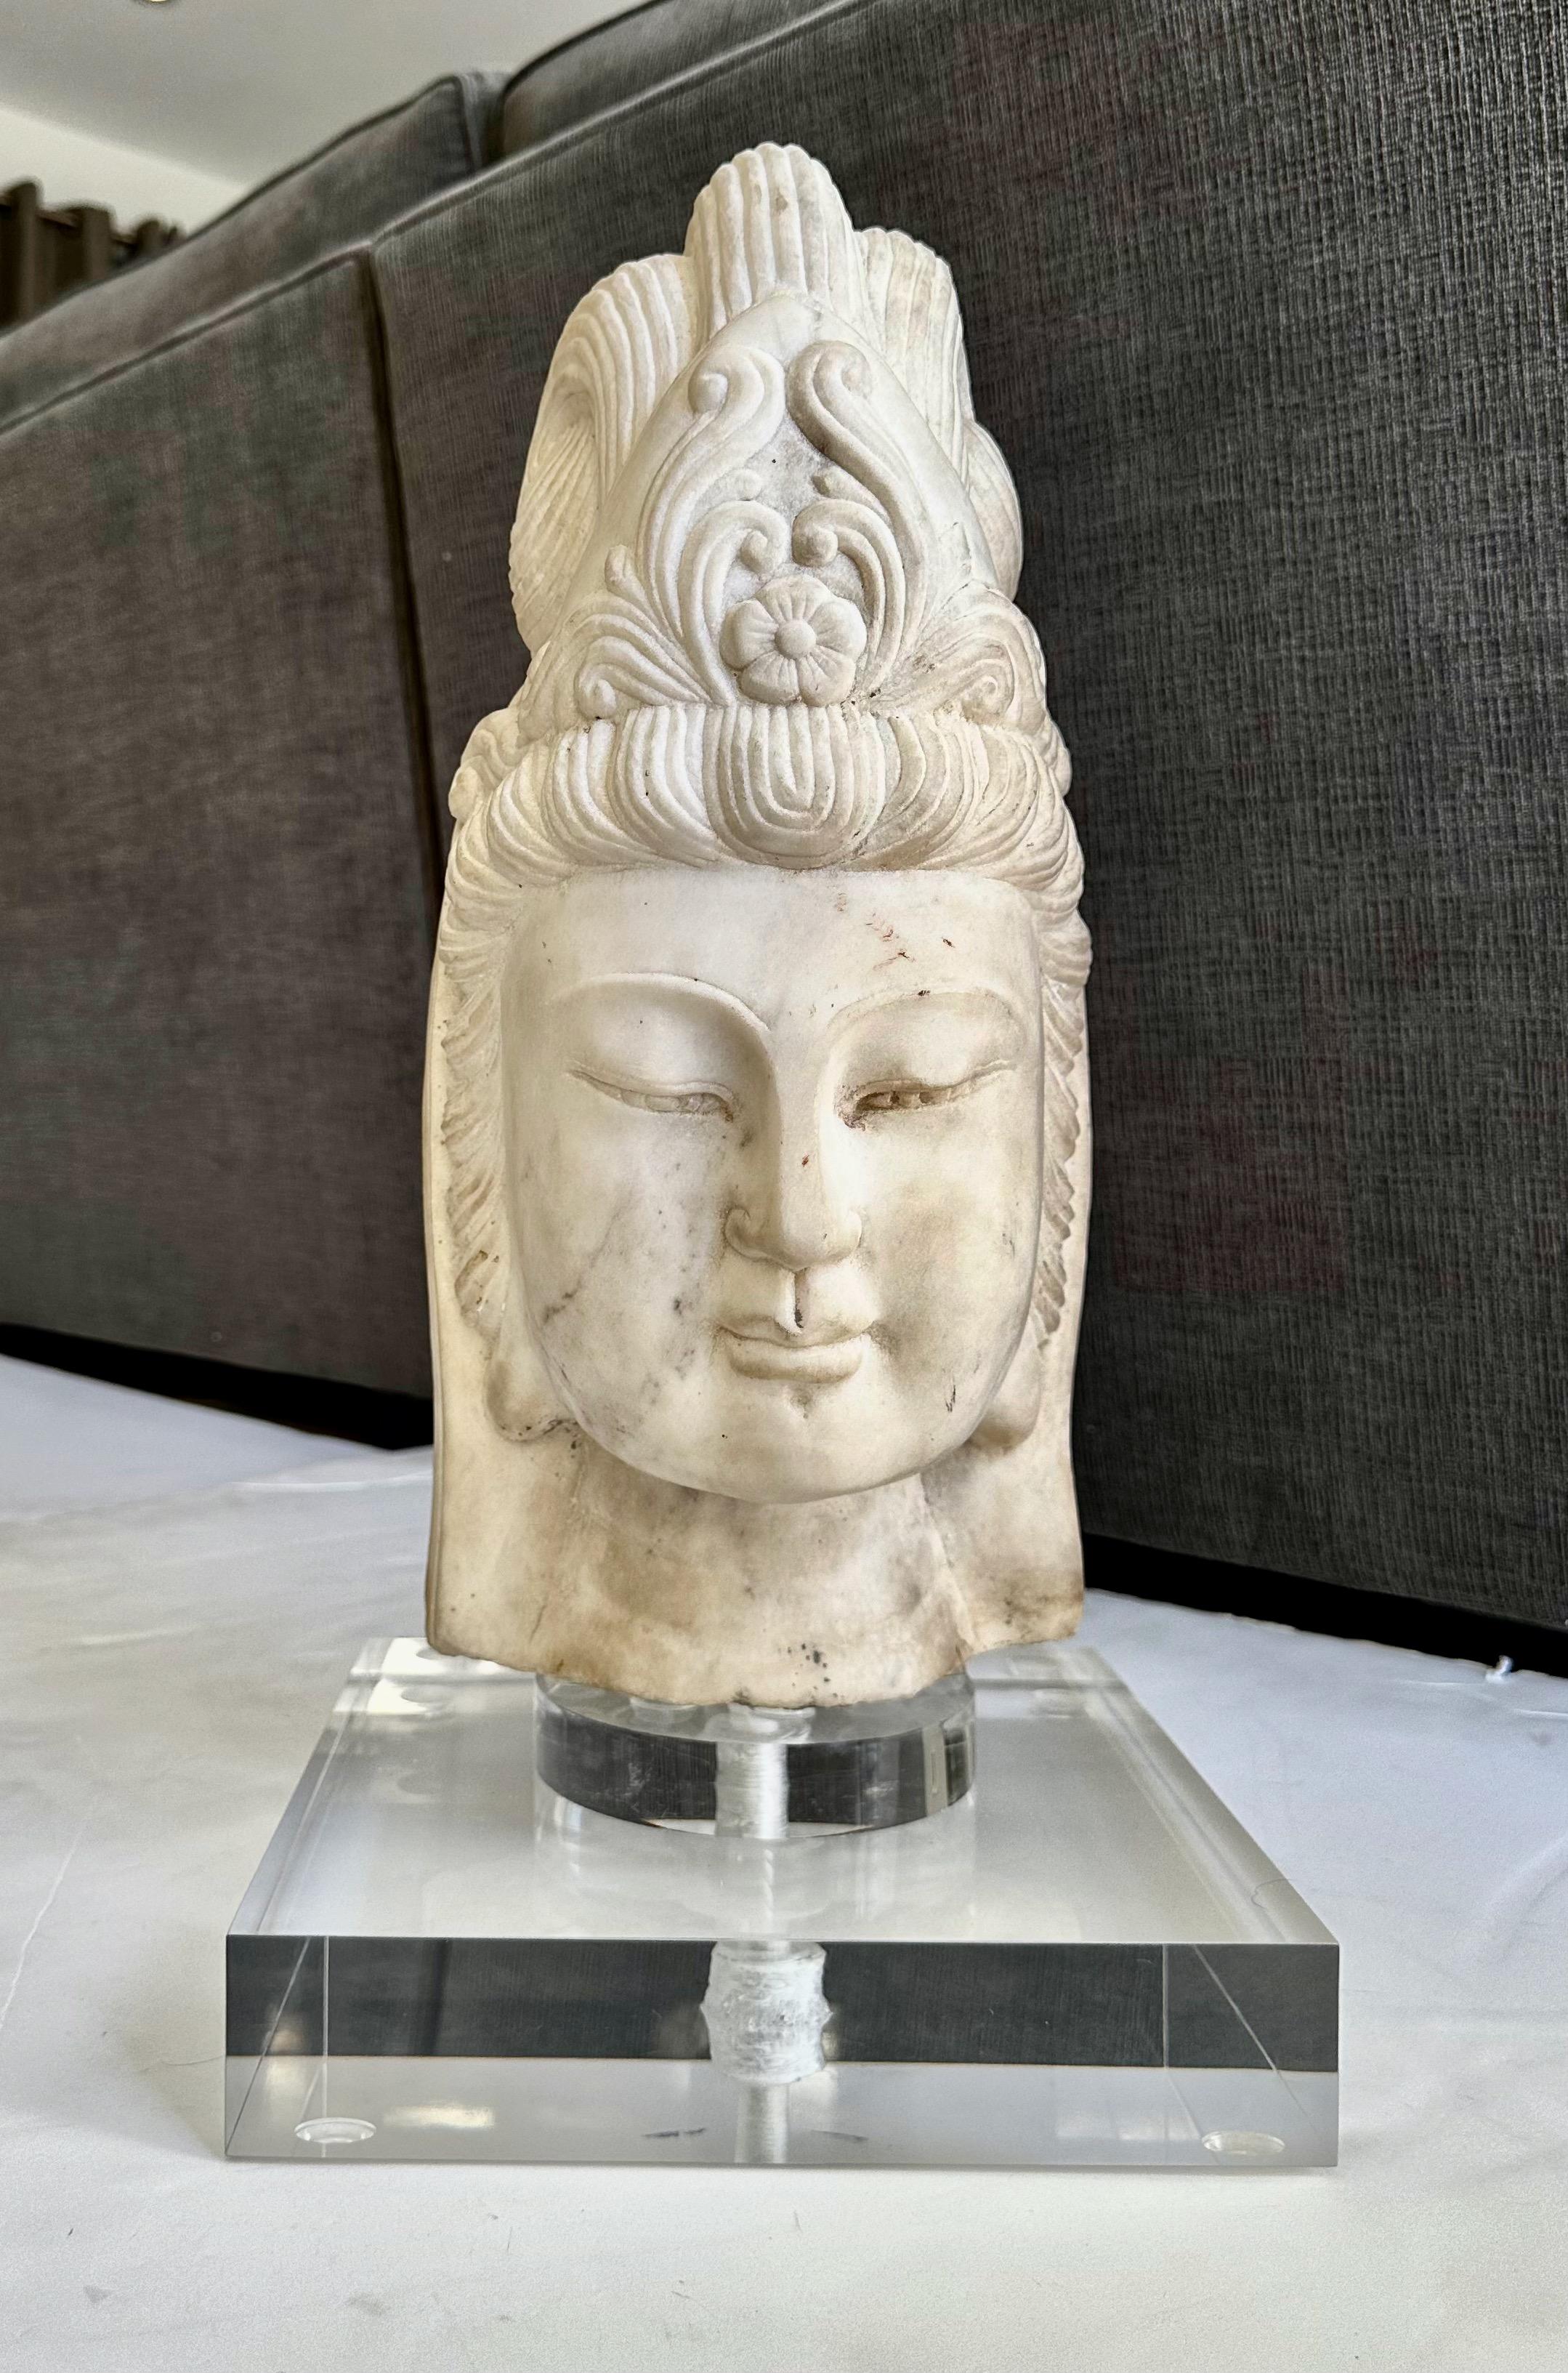 Beautifully executed hand carved marble buddha head fragment of Quan Yin. The youthful face is peaceful and serine framed by an intricately carved headdress. A striking art object with fine quality workmanship. Sits on custom acrylic base